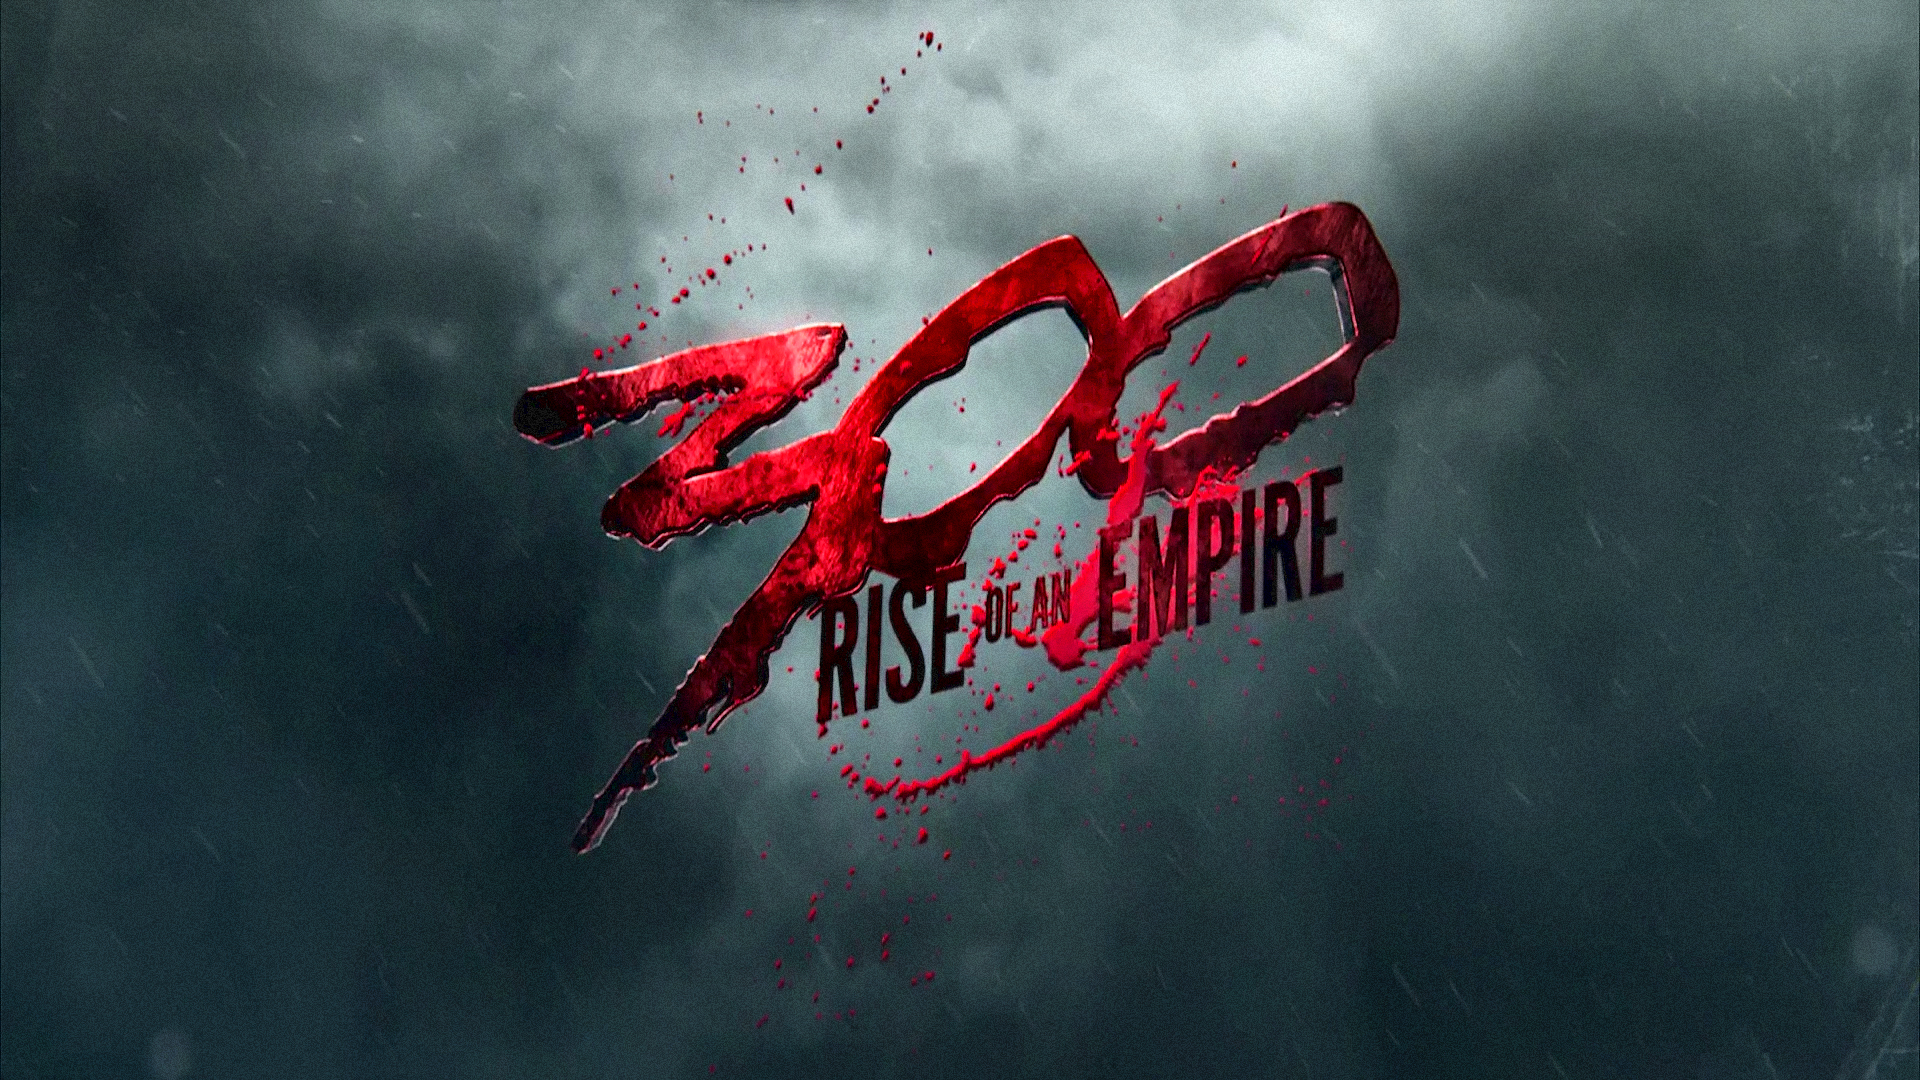 300 Rise Of An Empire Action Drama War Fantasy Poster Images, Photos, Reviews